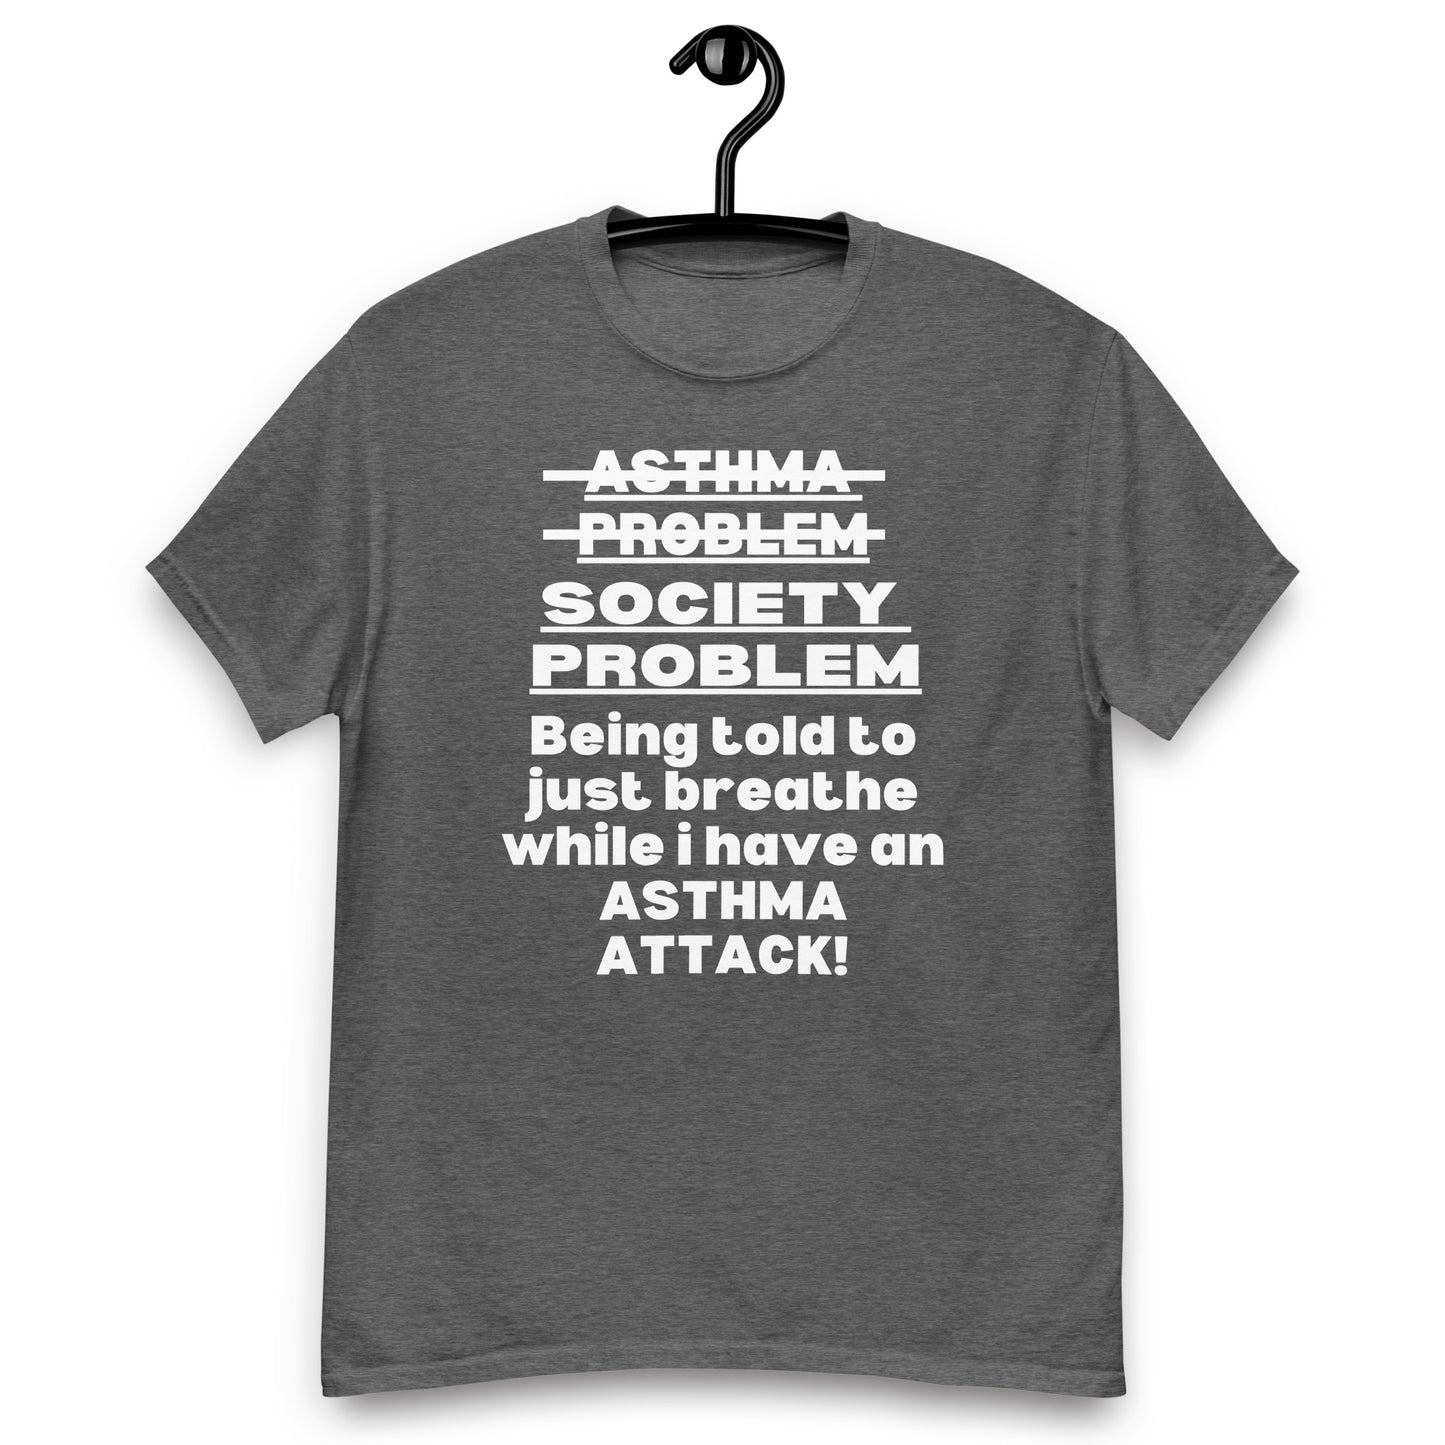 Asthma warrior, Asthma quote, Asthma awareness, Bronchial asthma, Asthma fighter, Asthma survivor, Asthma Gift